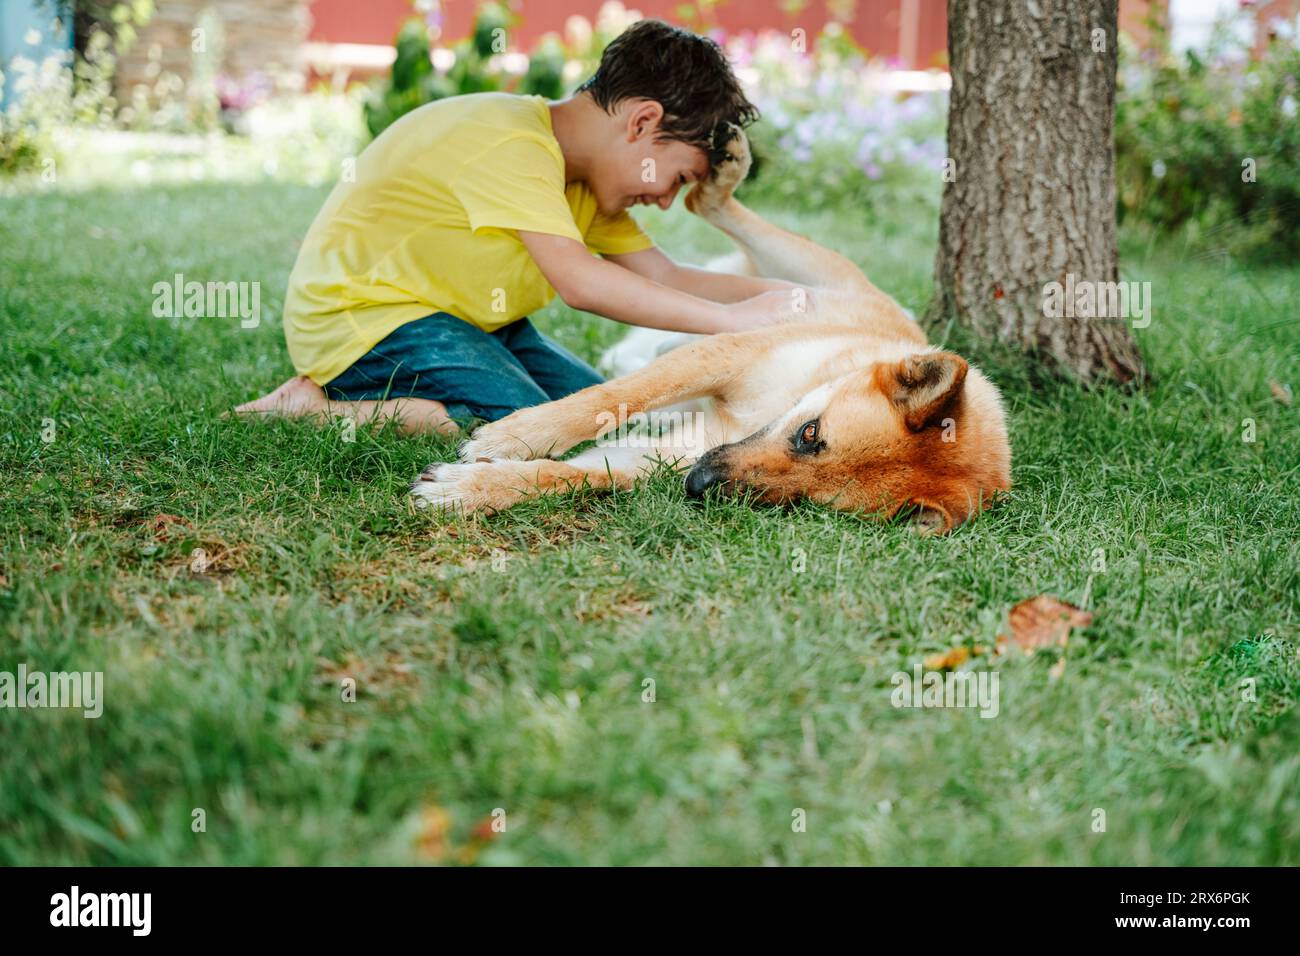 Boy playing with dog lying on grass in backyard Stock Photo